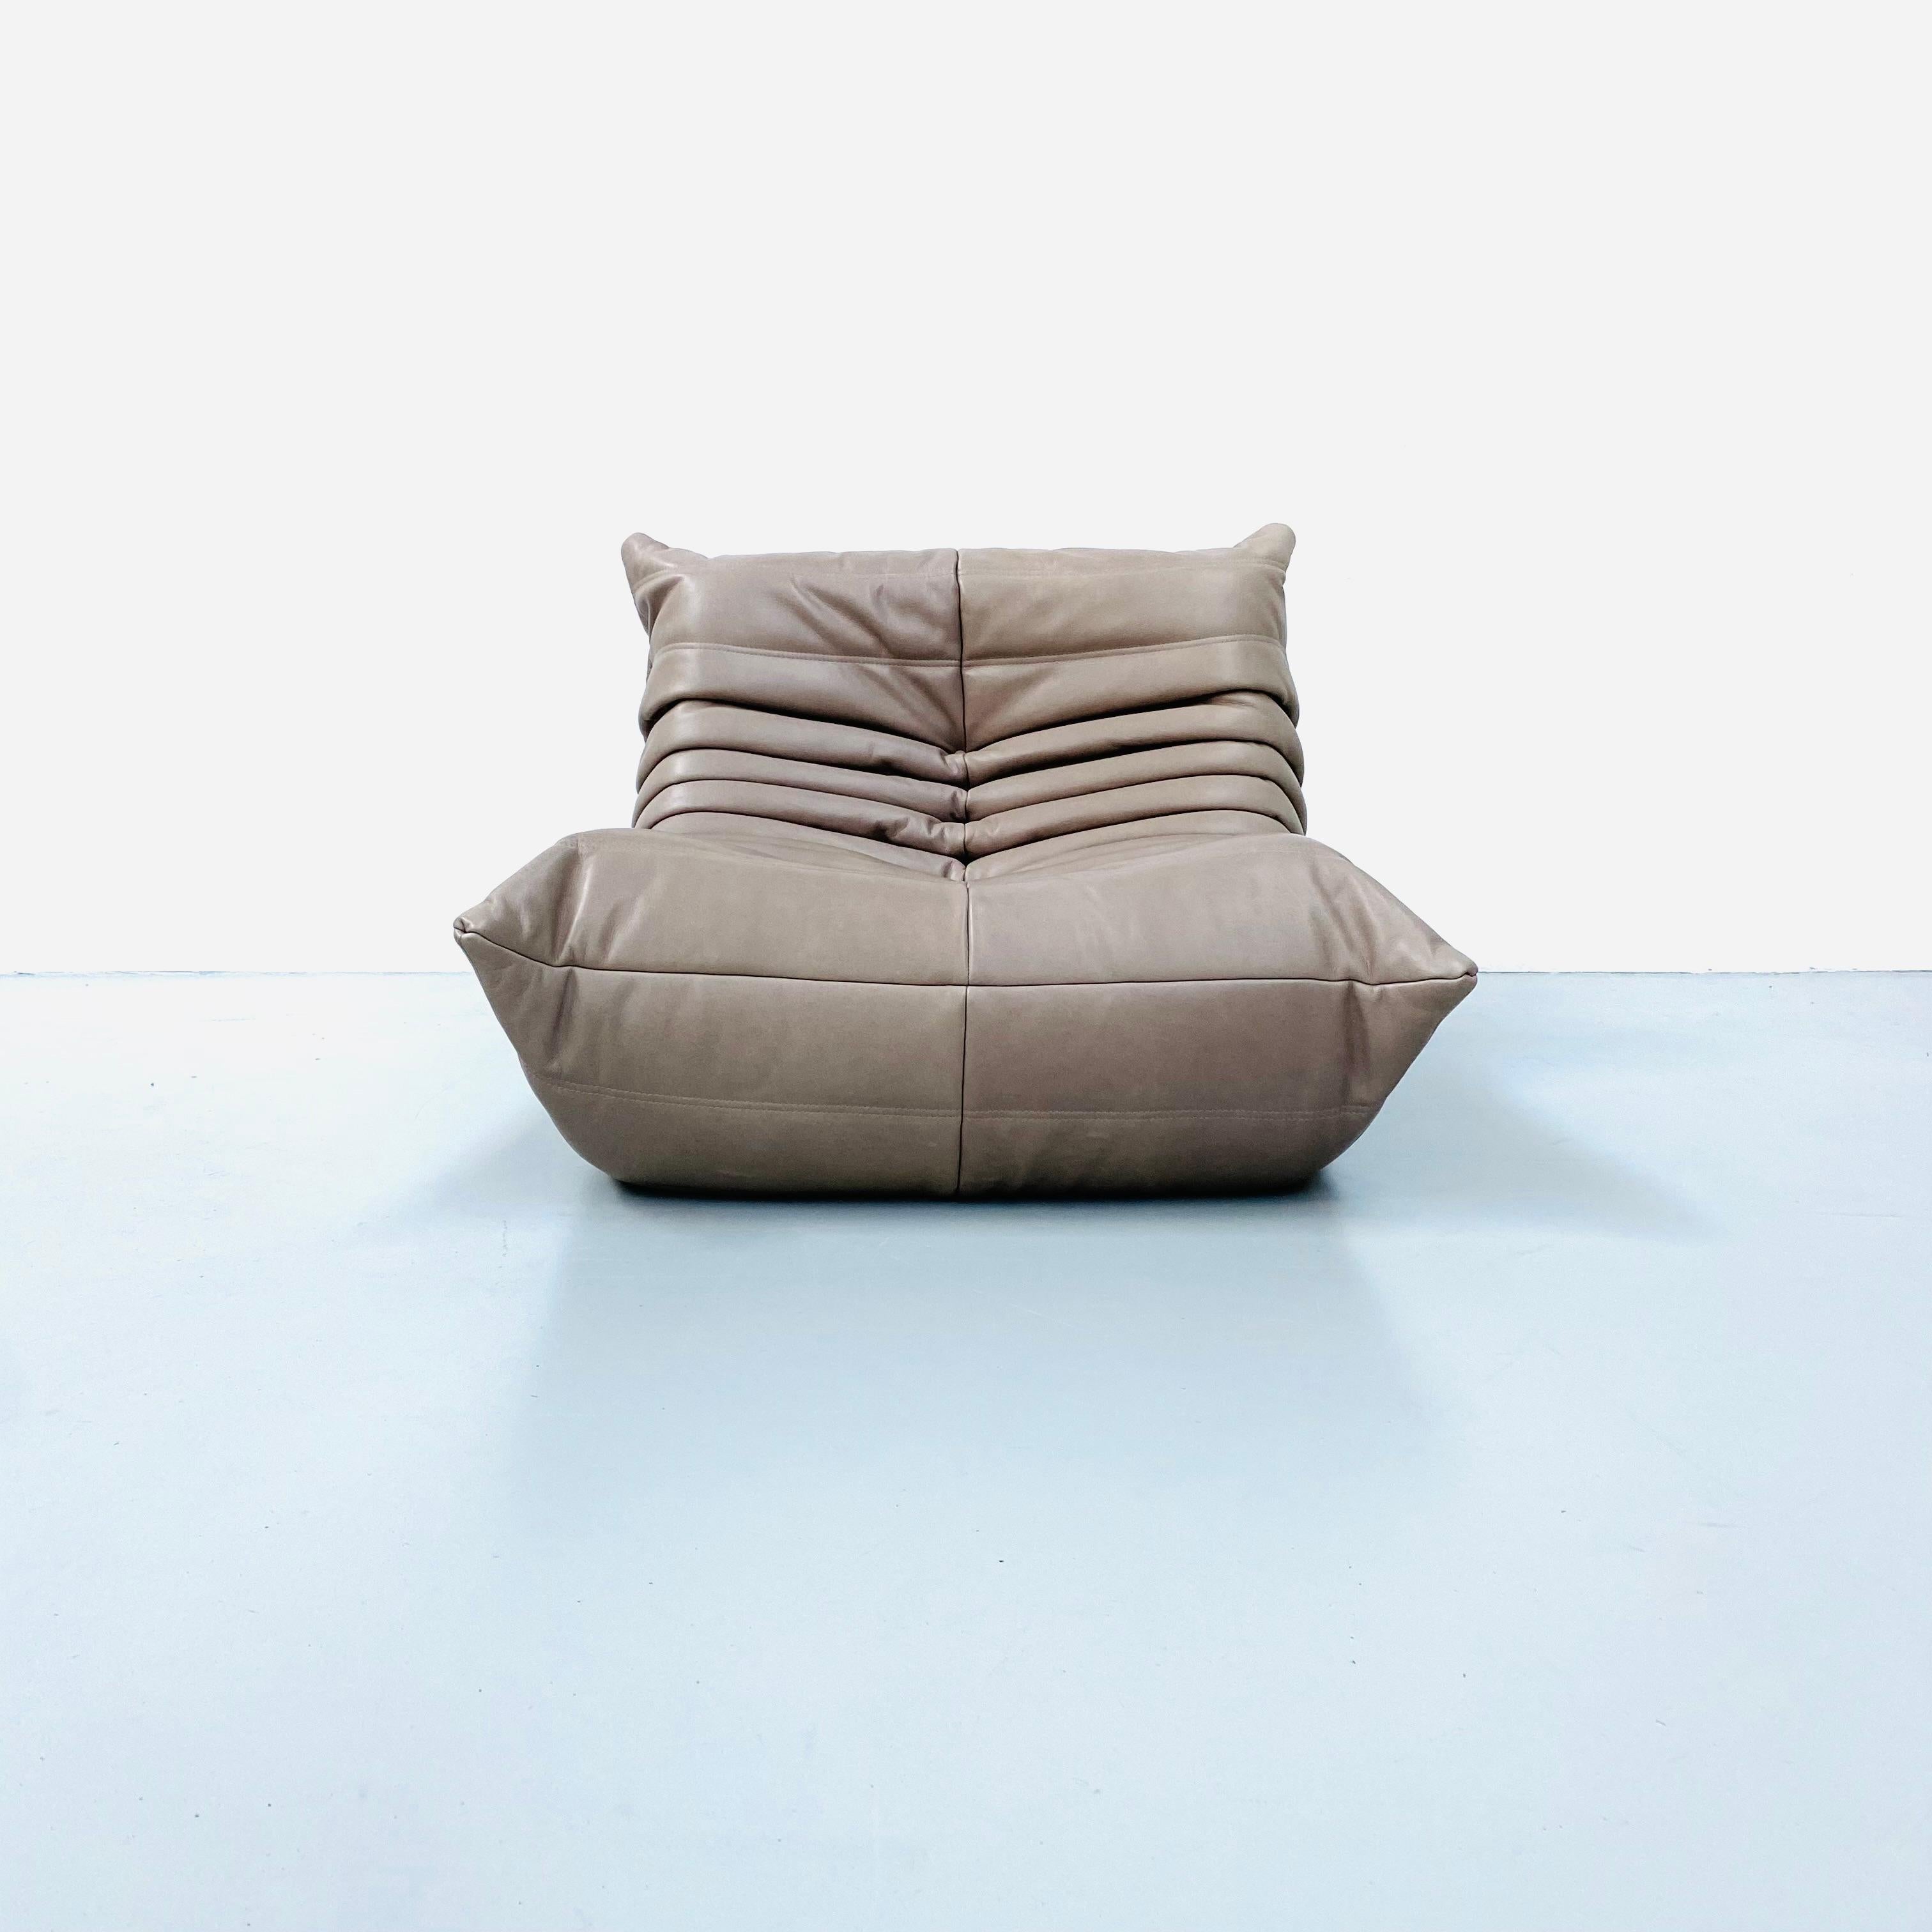 The Frenchman Michel Ducaroy designed the Togo in 1973 for Ligne Roset. The intention of Michel Ducaroy was to create the ultimate piece of furniture to relax in. Well, he succeeded, the design is over 40 years old but still very popular today. The